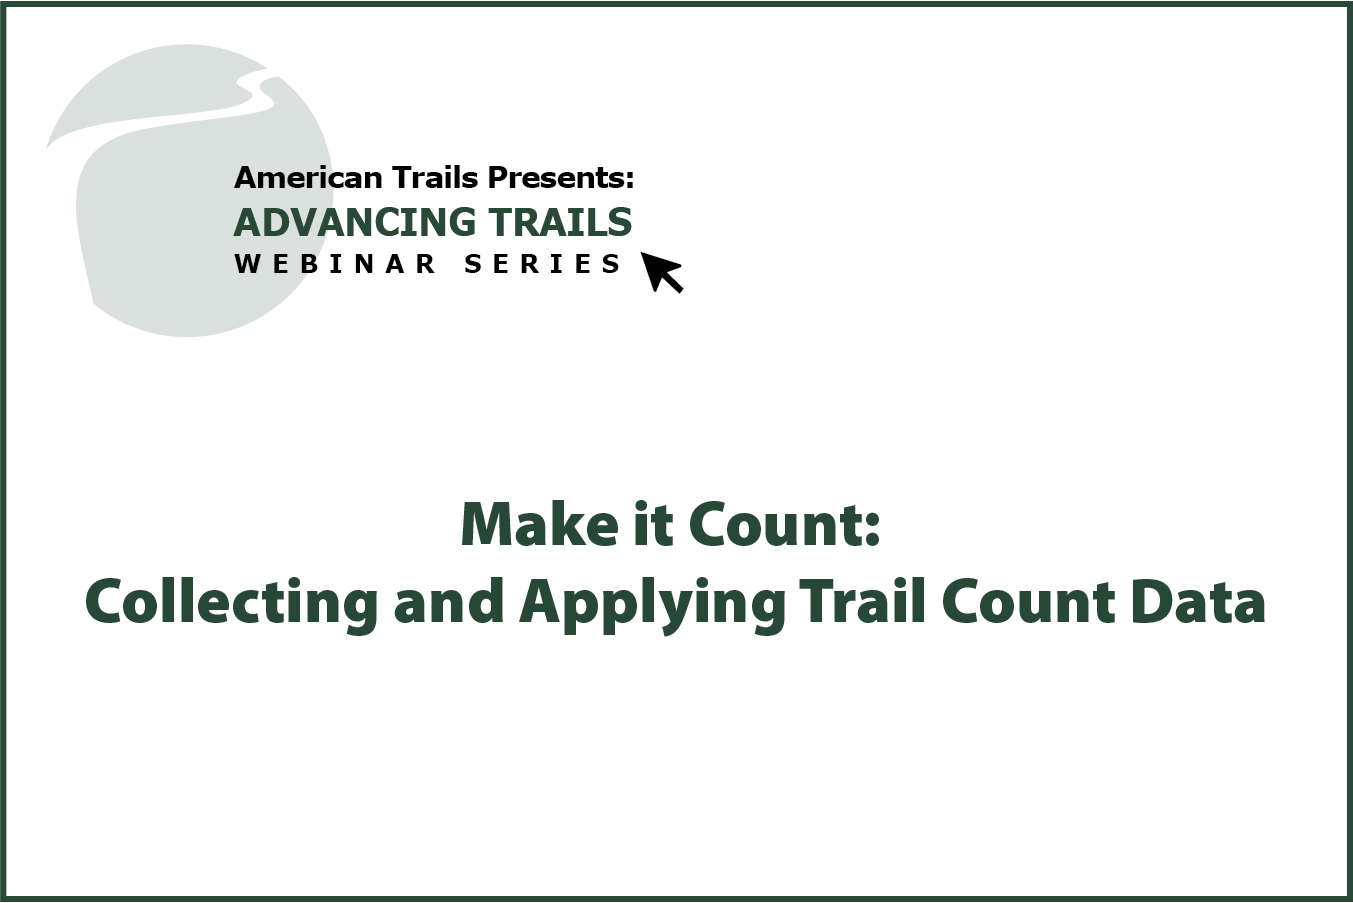 Make it Count: Collecting and Applying Trail Count Data (RECORDING)